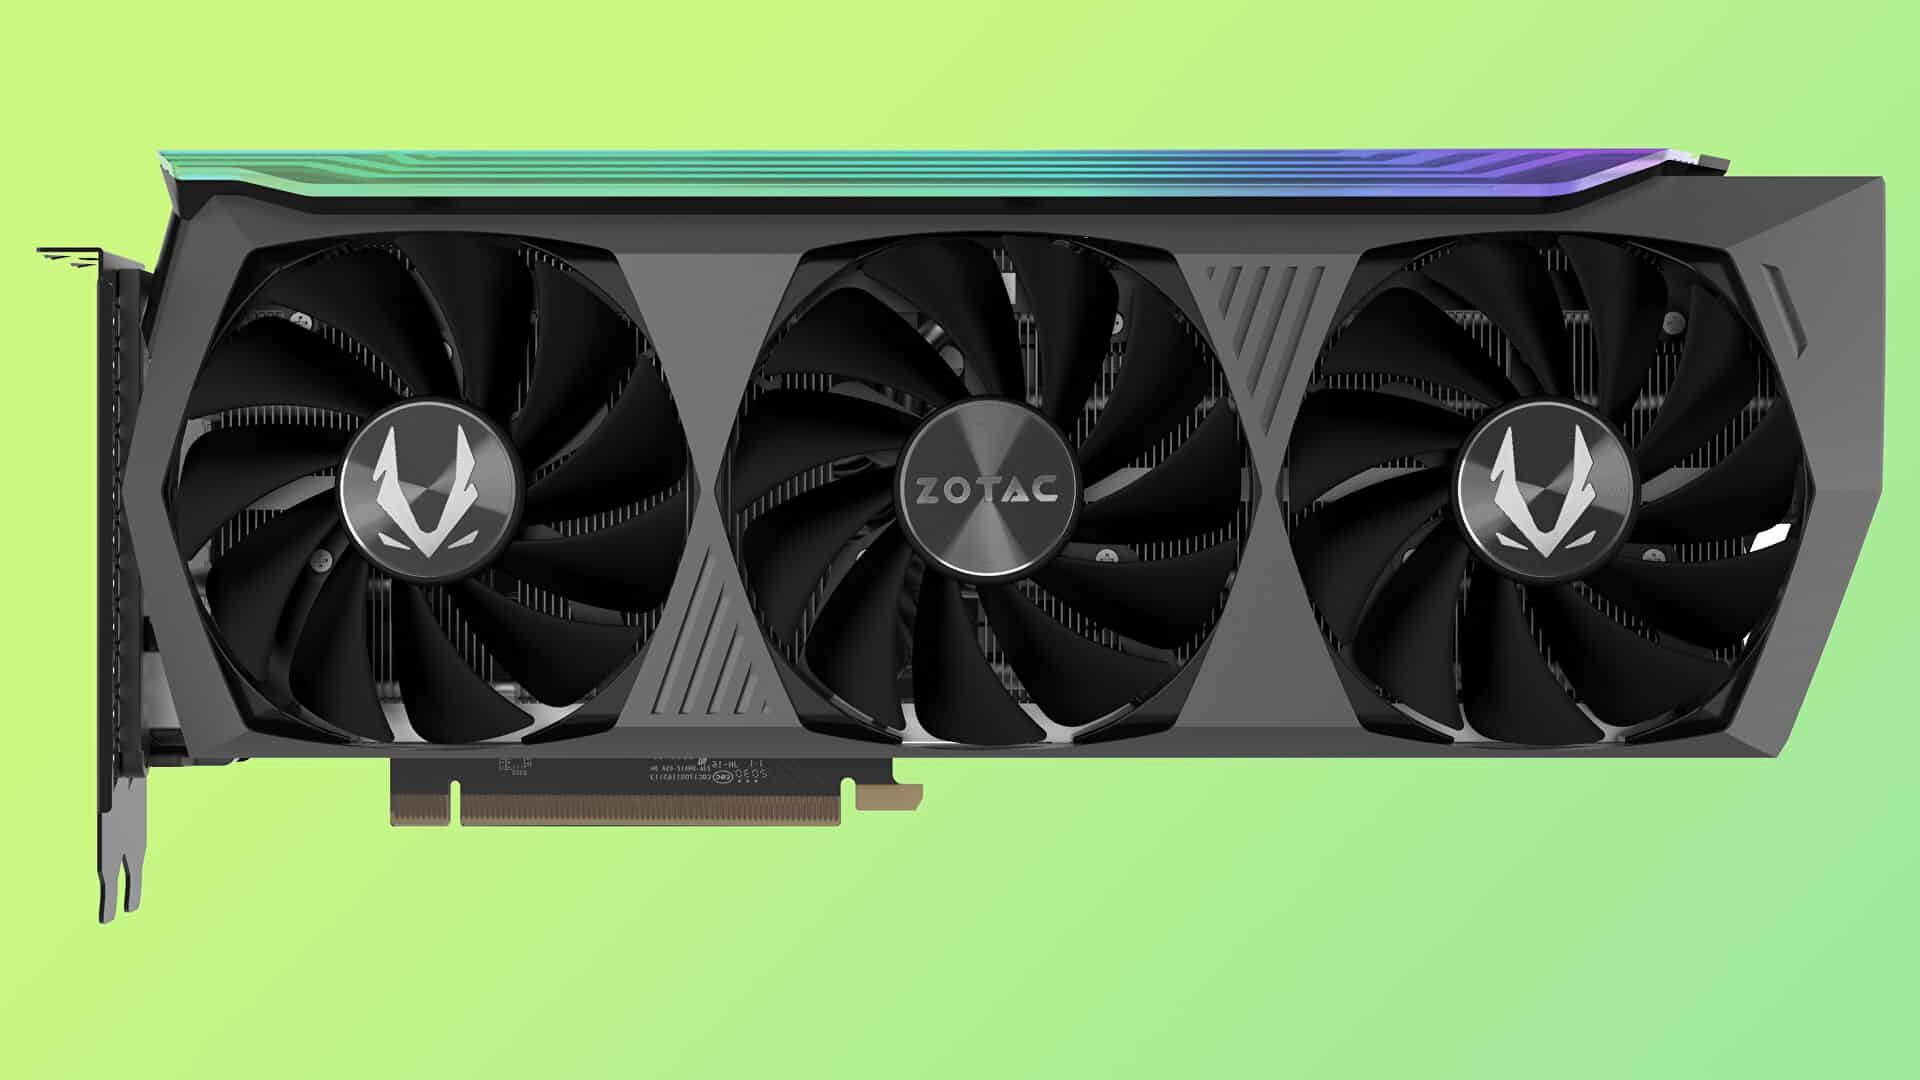 This RTX 3080 graphics card costs £660 - just £10 above RRP for a triple-fan card